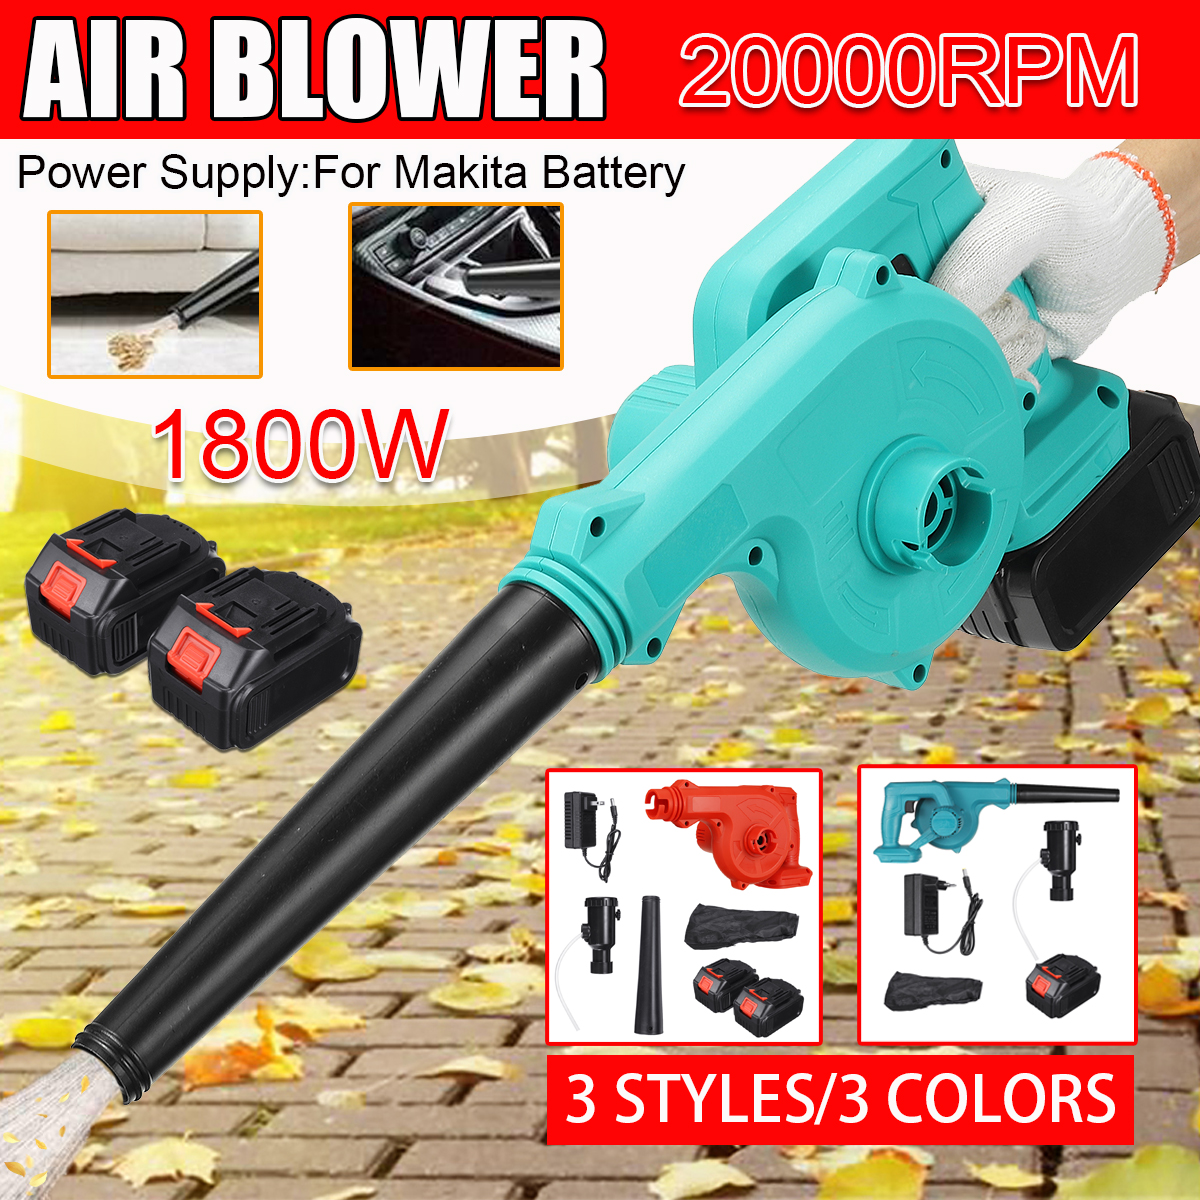 1800W-Portable-Cordless-Car-Washer-High-Pressure-Car-Household-Washer-Cleaner-Guns-Pumps-Tools-Fit-M-1912132-2